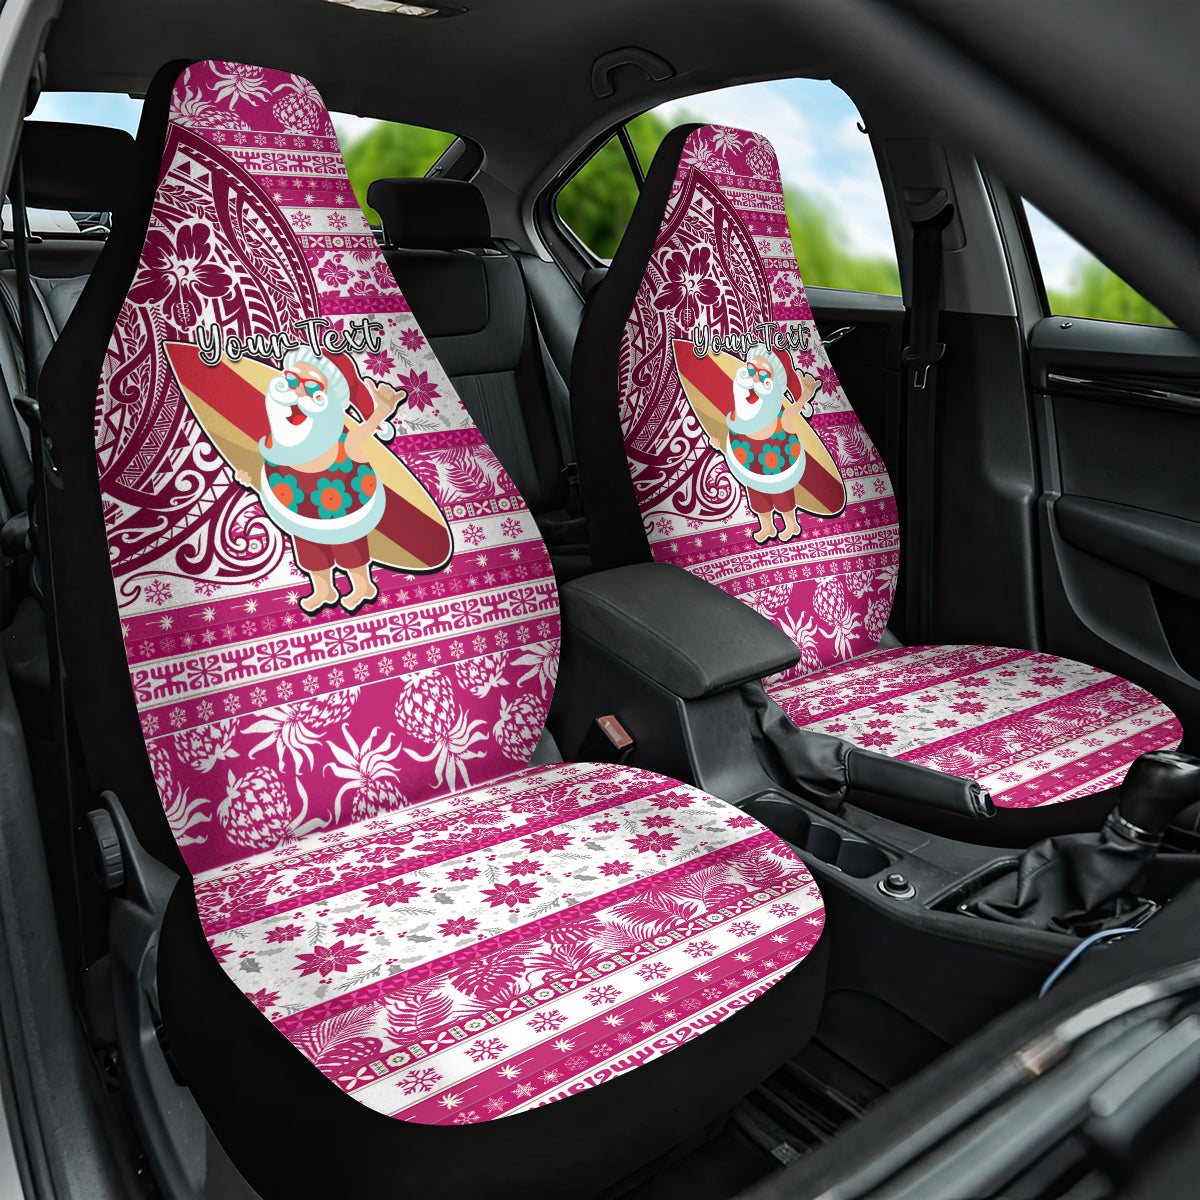 Custom Hawaii Mele Kalikimaka Car Seat Cover Santa Claus Surfing with Hawaiian Pattern Striped Pink Style LT03 One Size Pink - Polynesian Pride